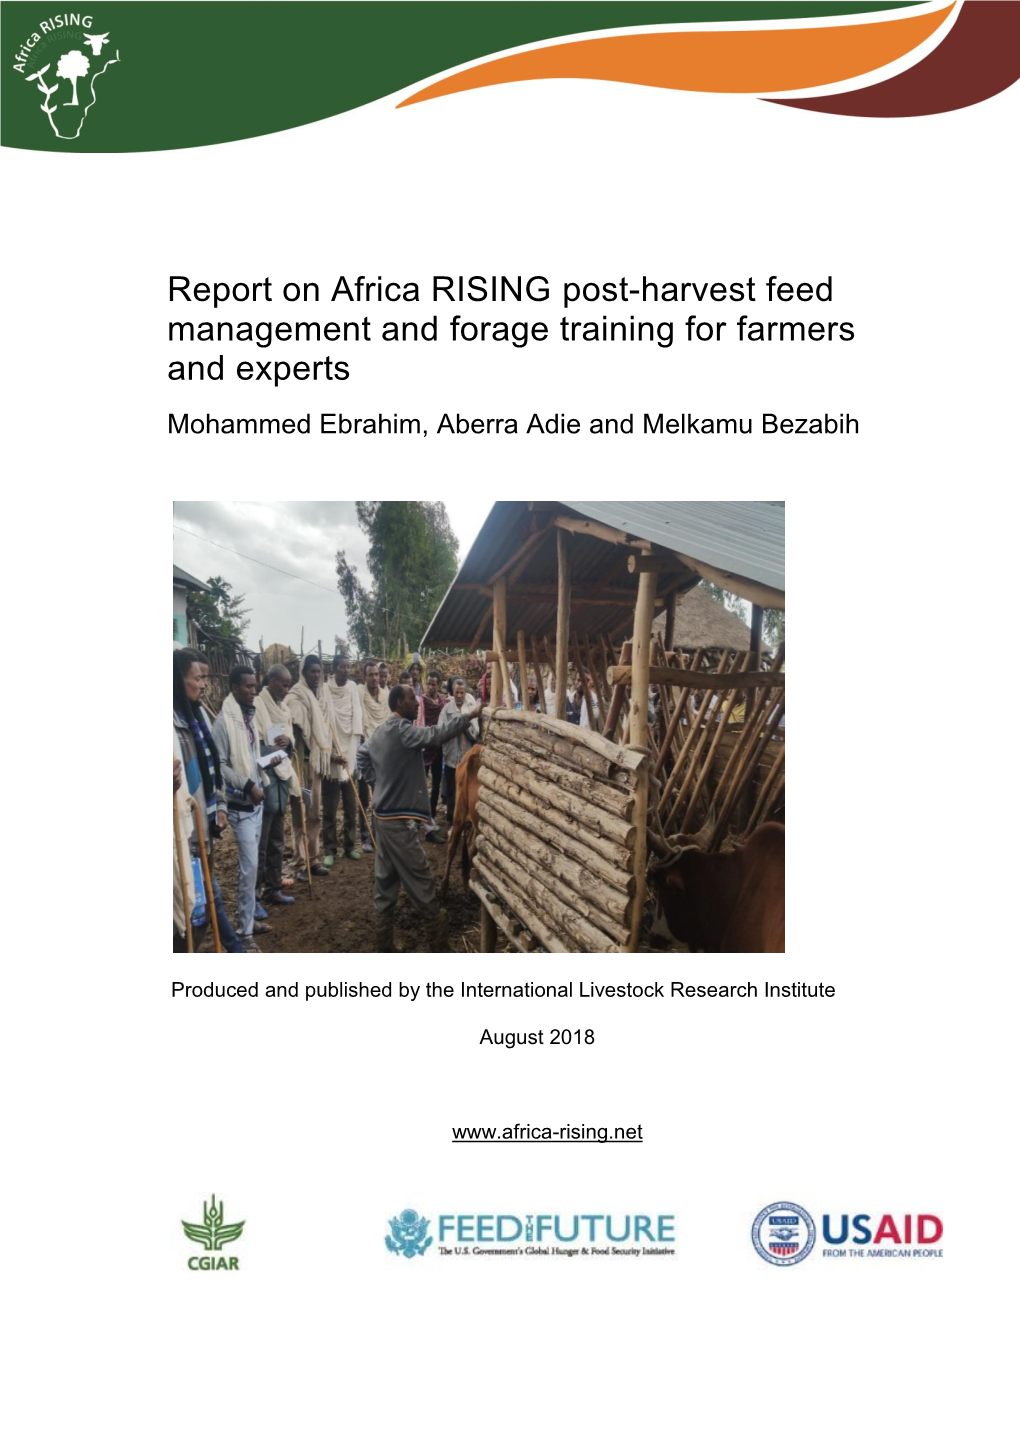 Report on Africa RISING Post-Harvest Feed Management and Forage Training for Farmers and Experts